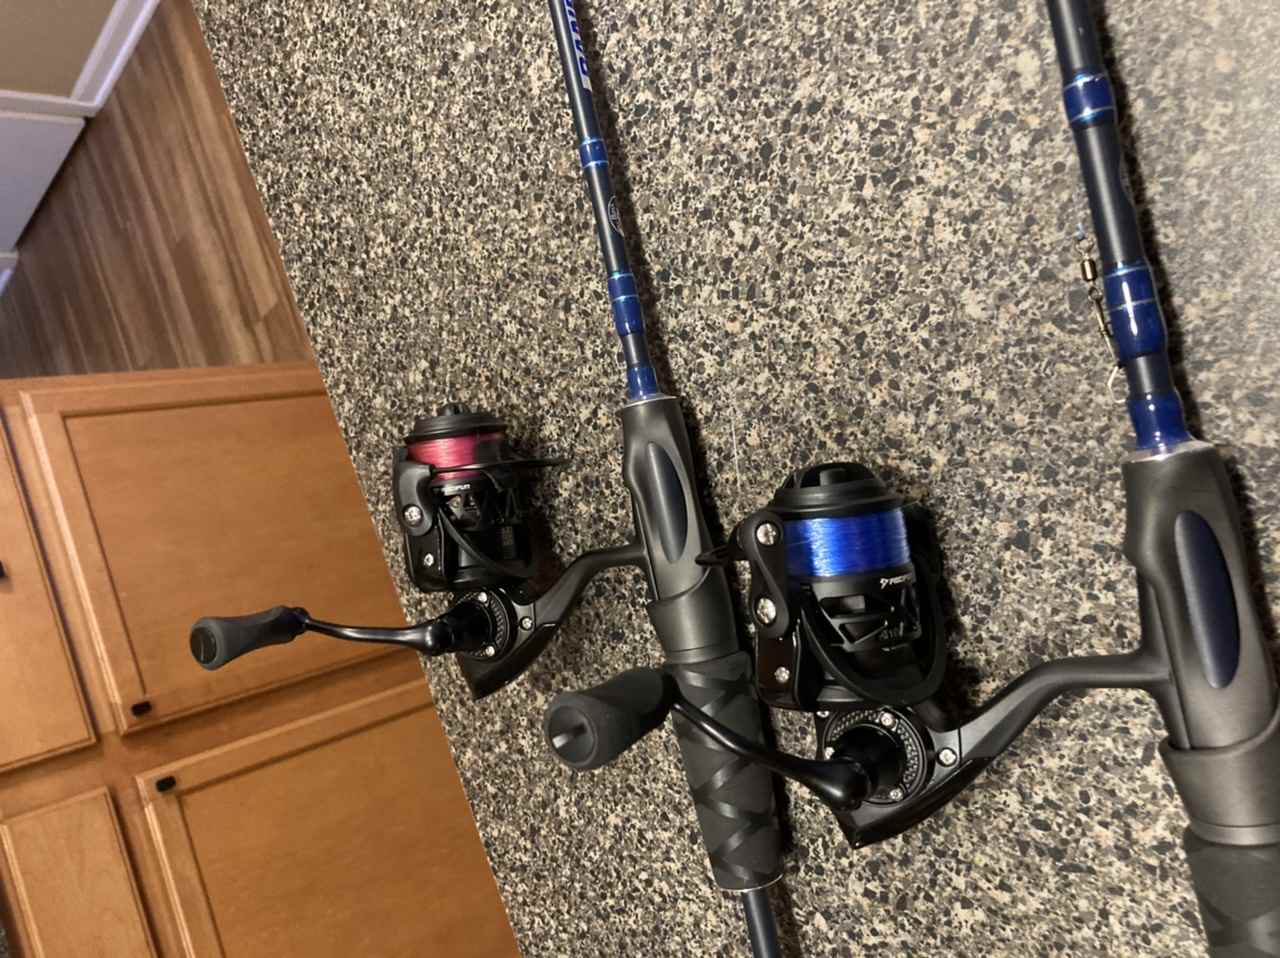 Any Kastking fans out there? - Page 2 - Fishing Rods, Reels, Line